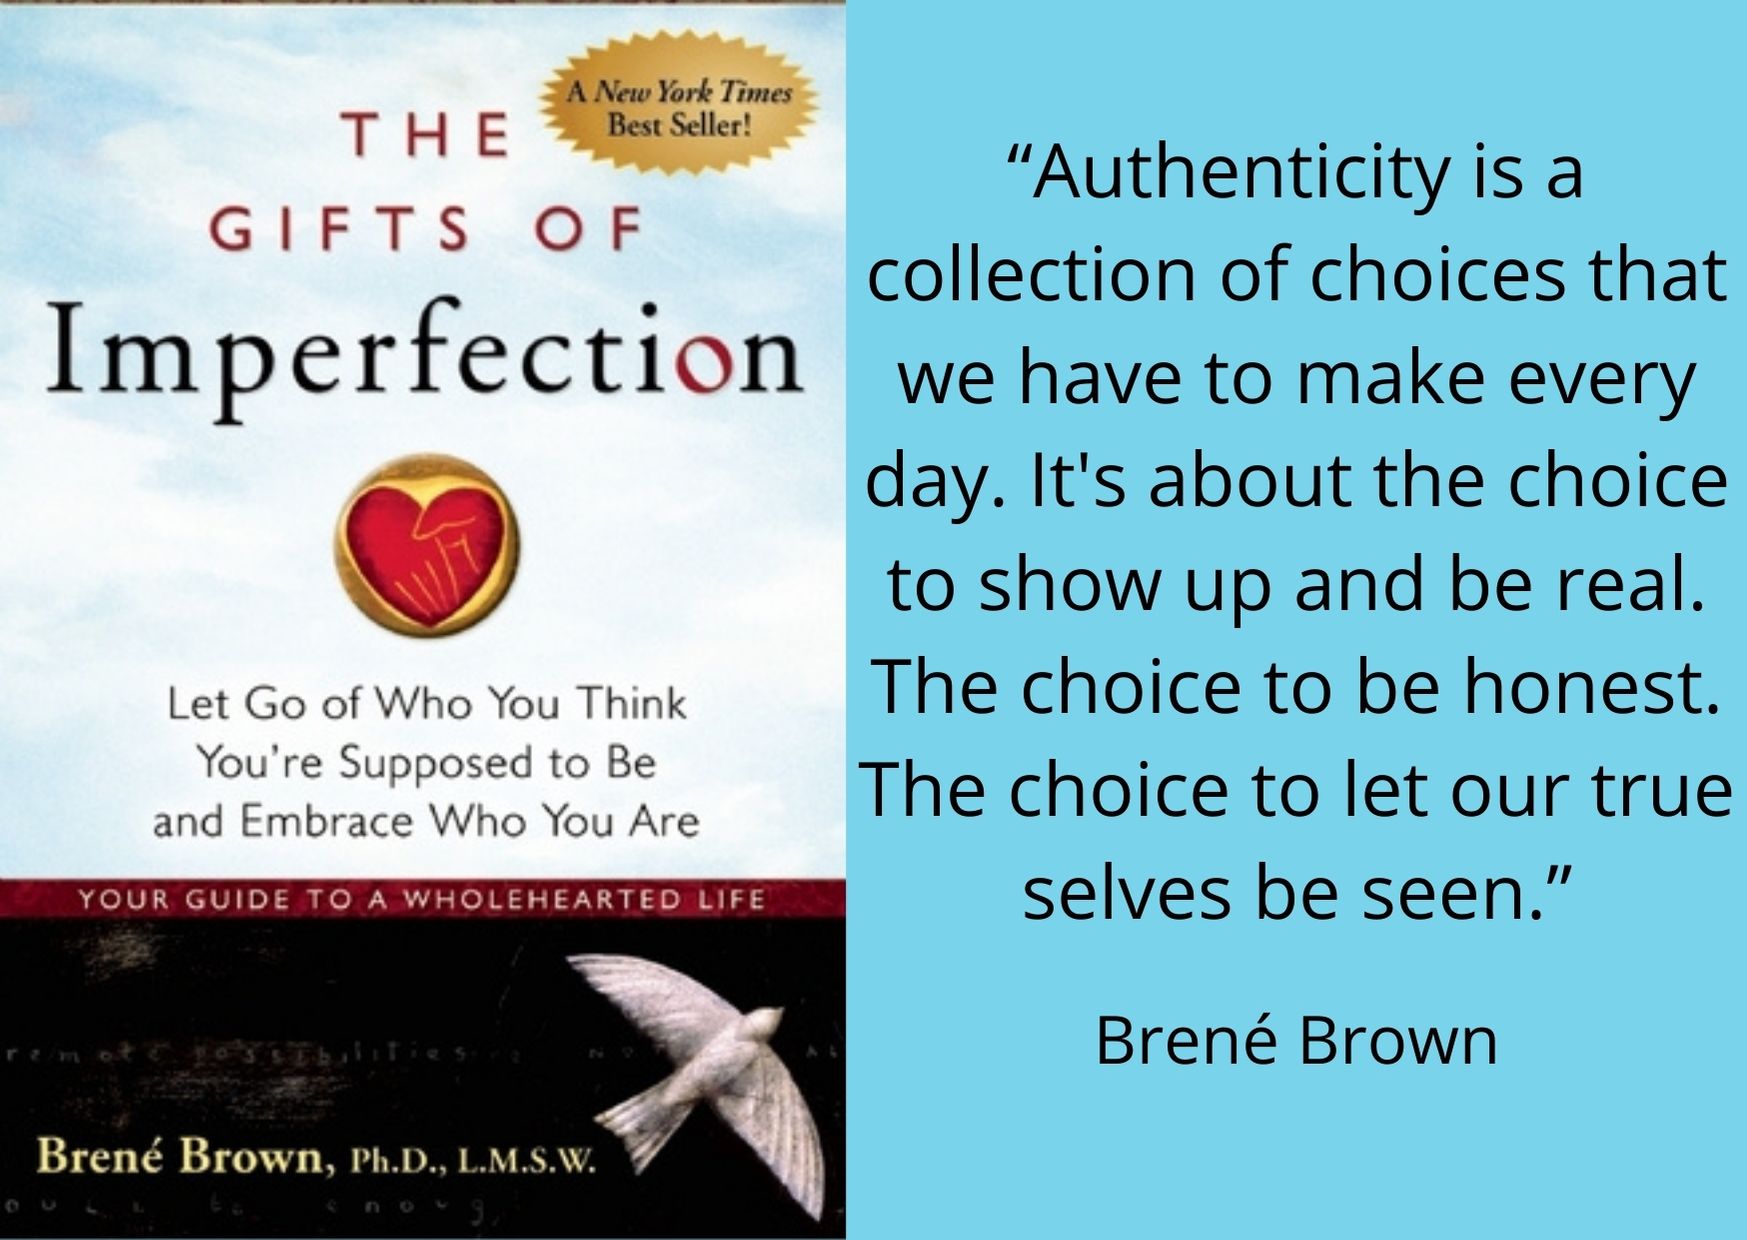 The gifts of imperfection